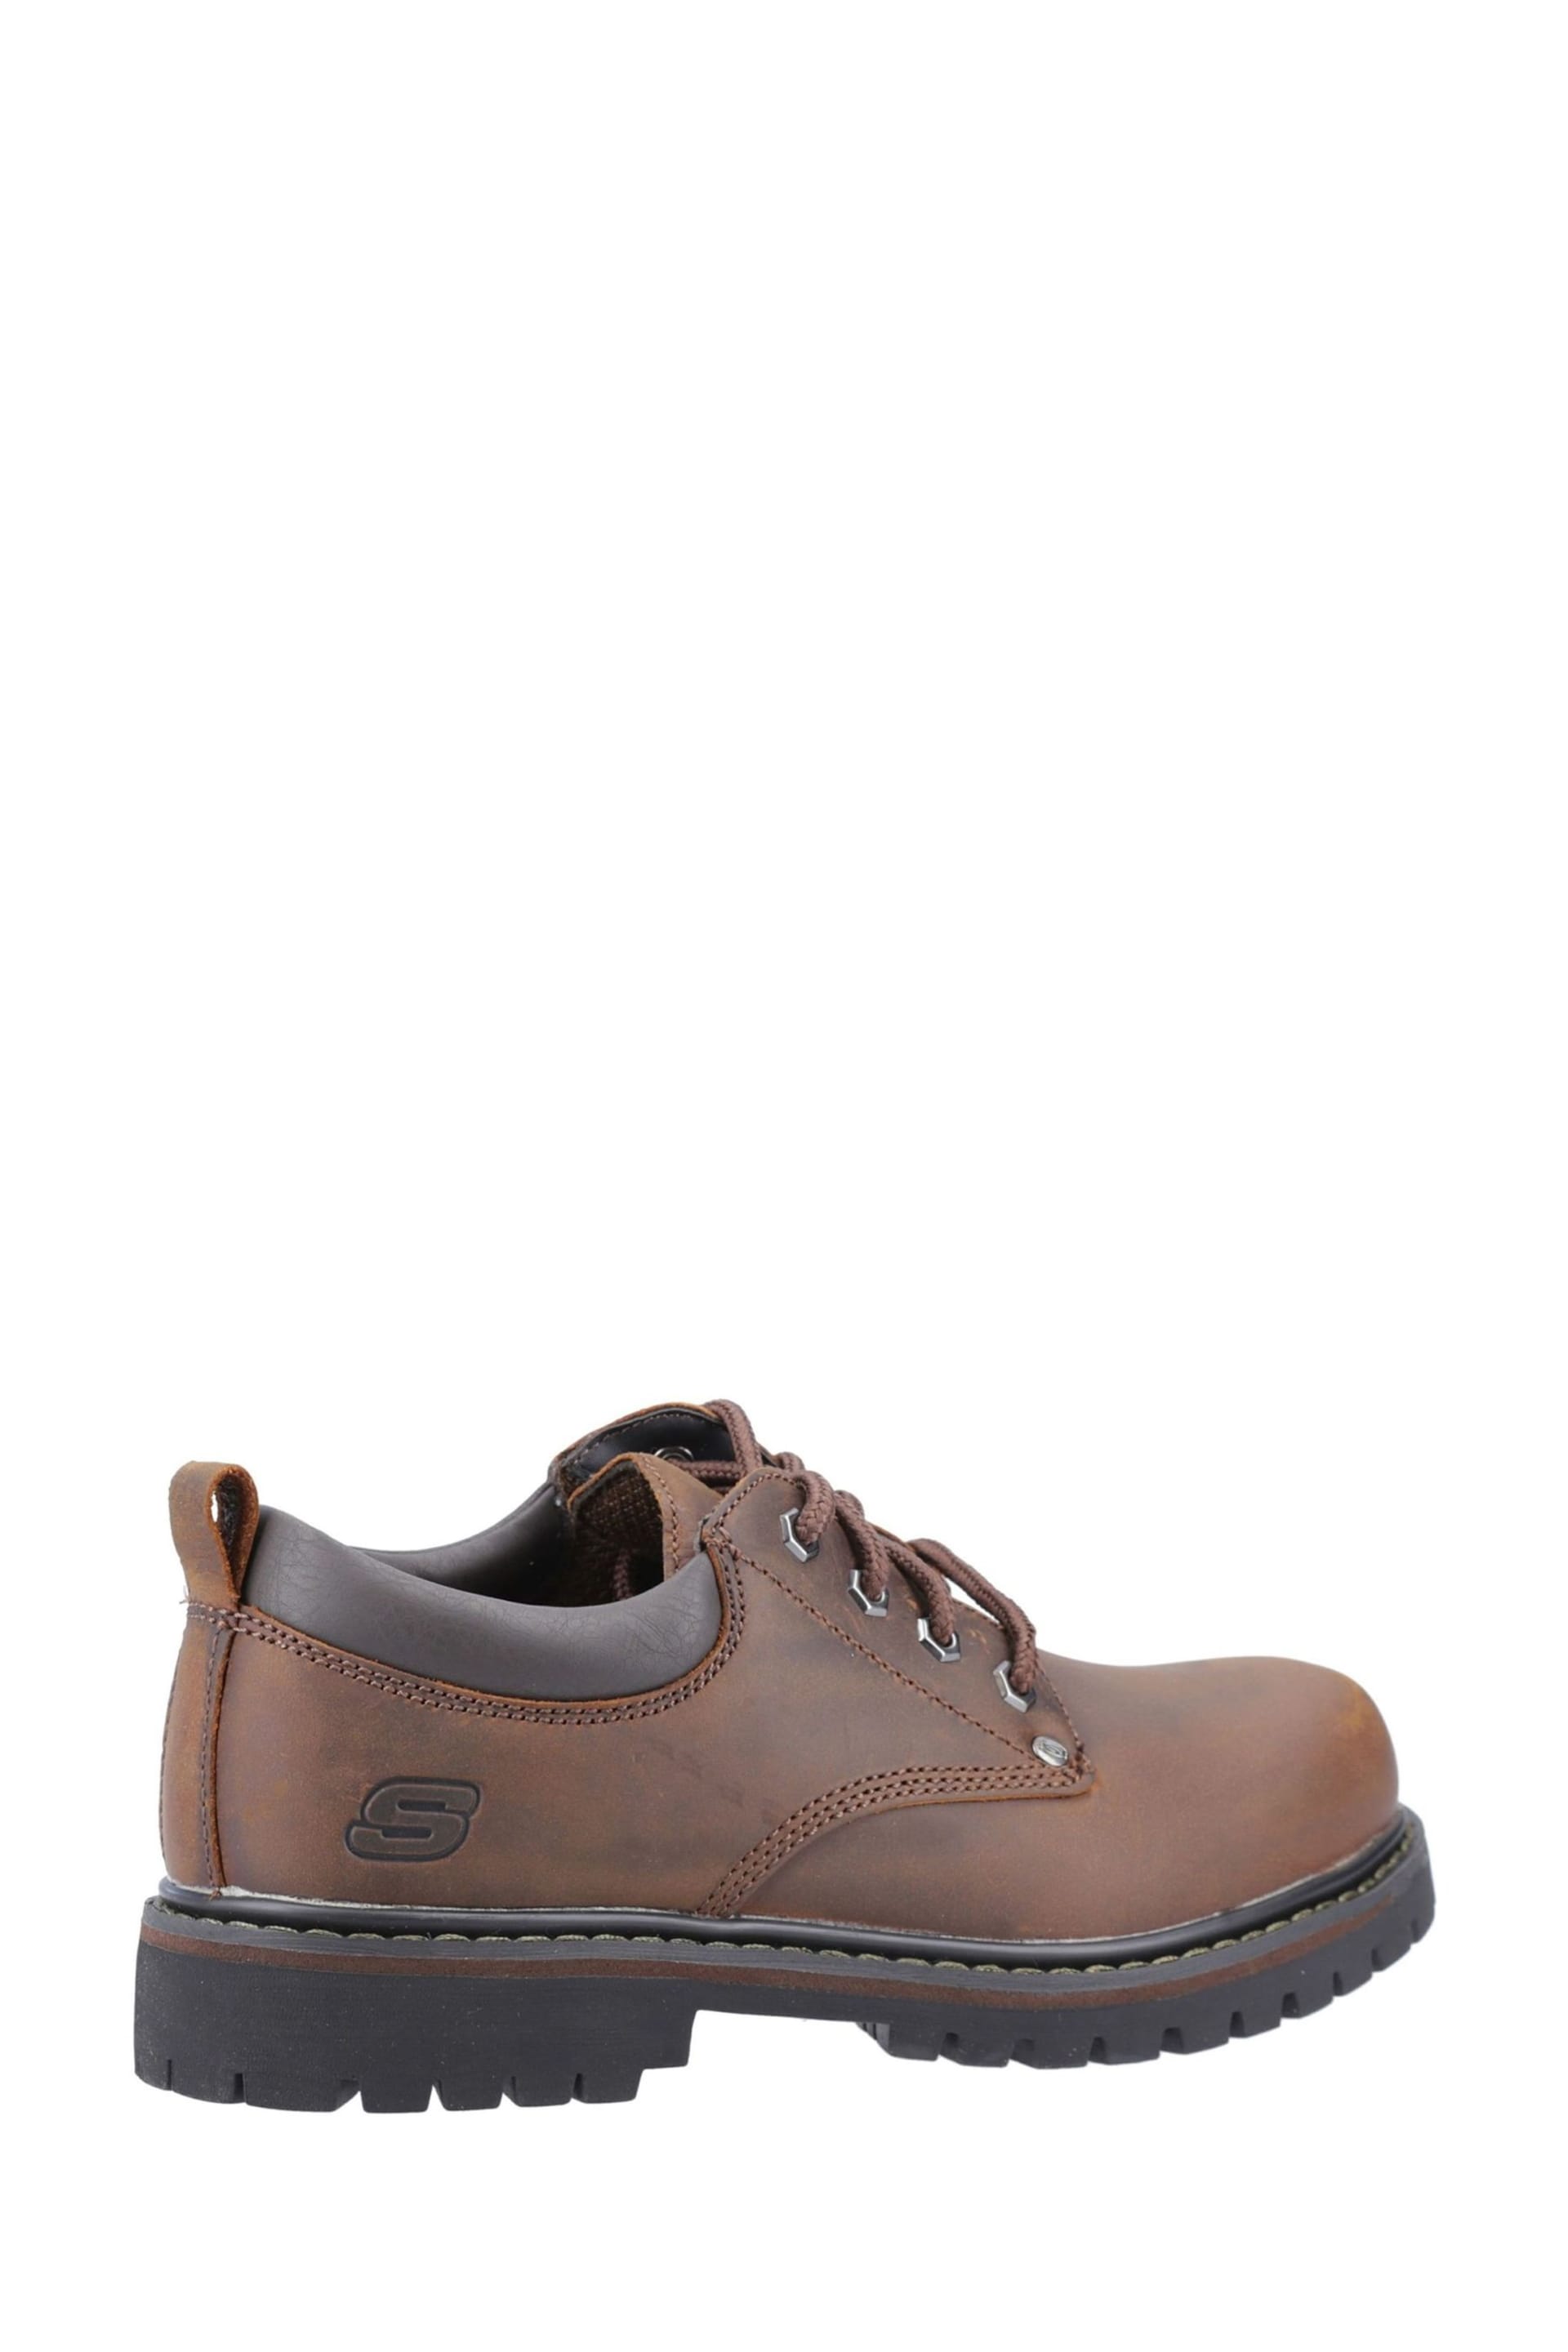 Skechers Brown Mens Tom Cats Shoes - Image 3 of 4